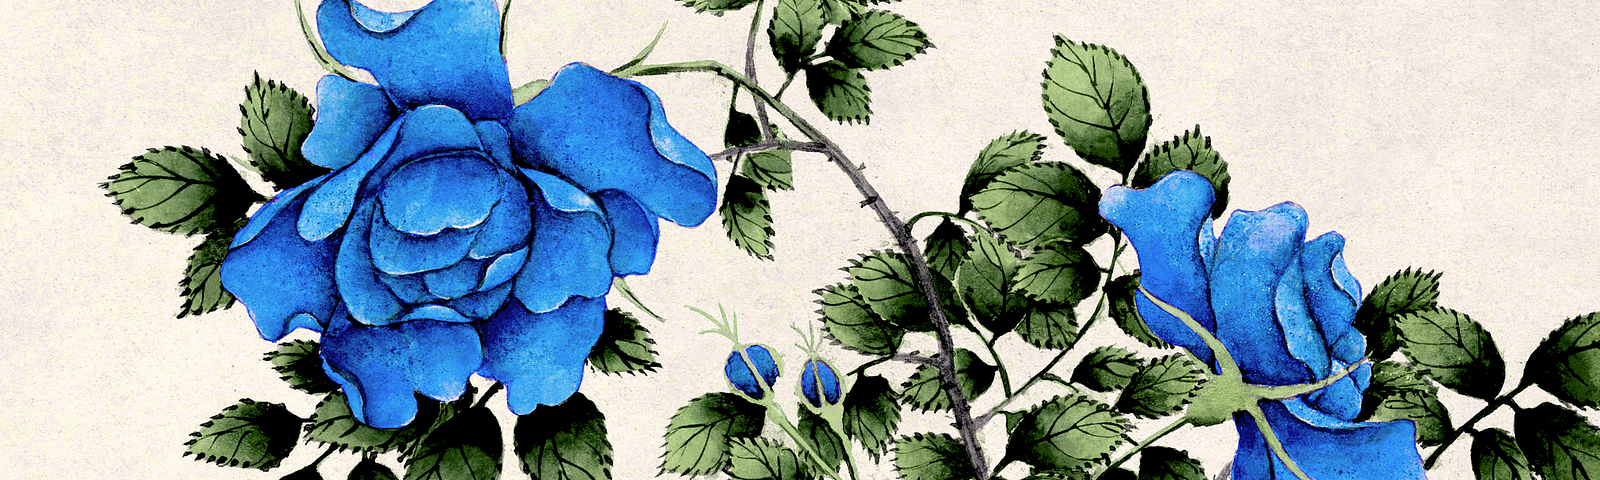 An 18th century Chinese painting of roses, with the roses’ color changed to blue.